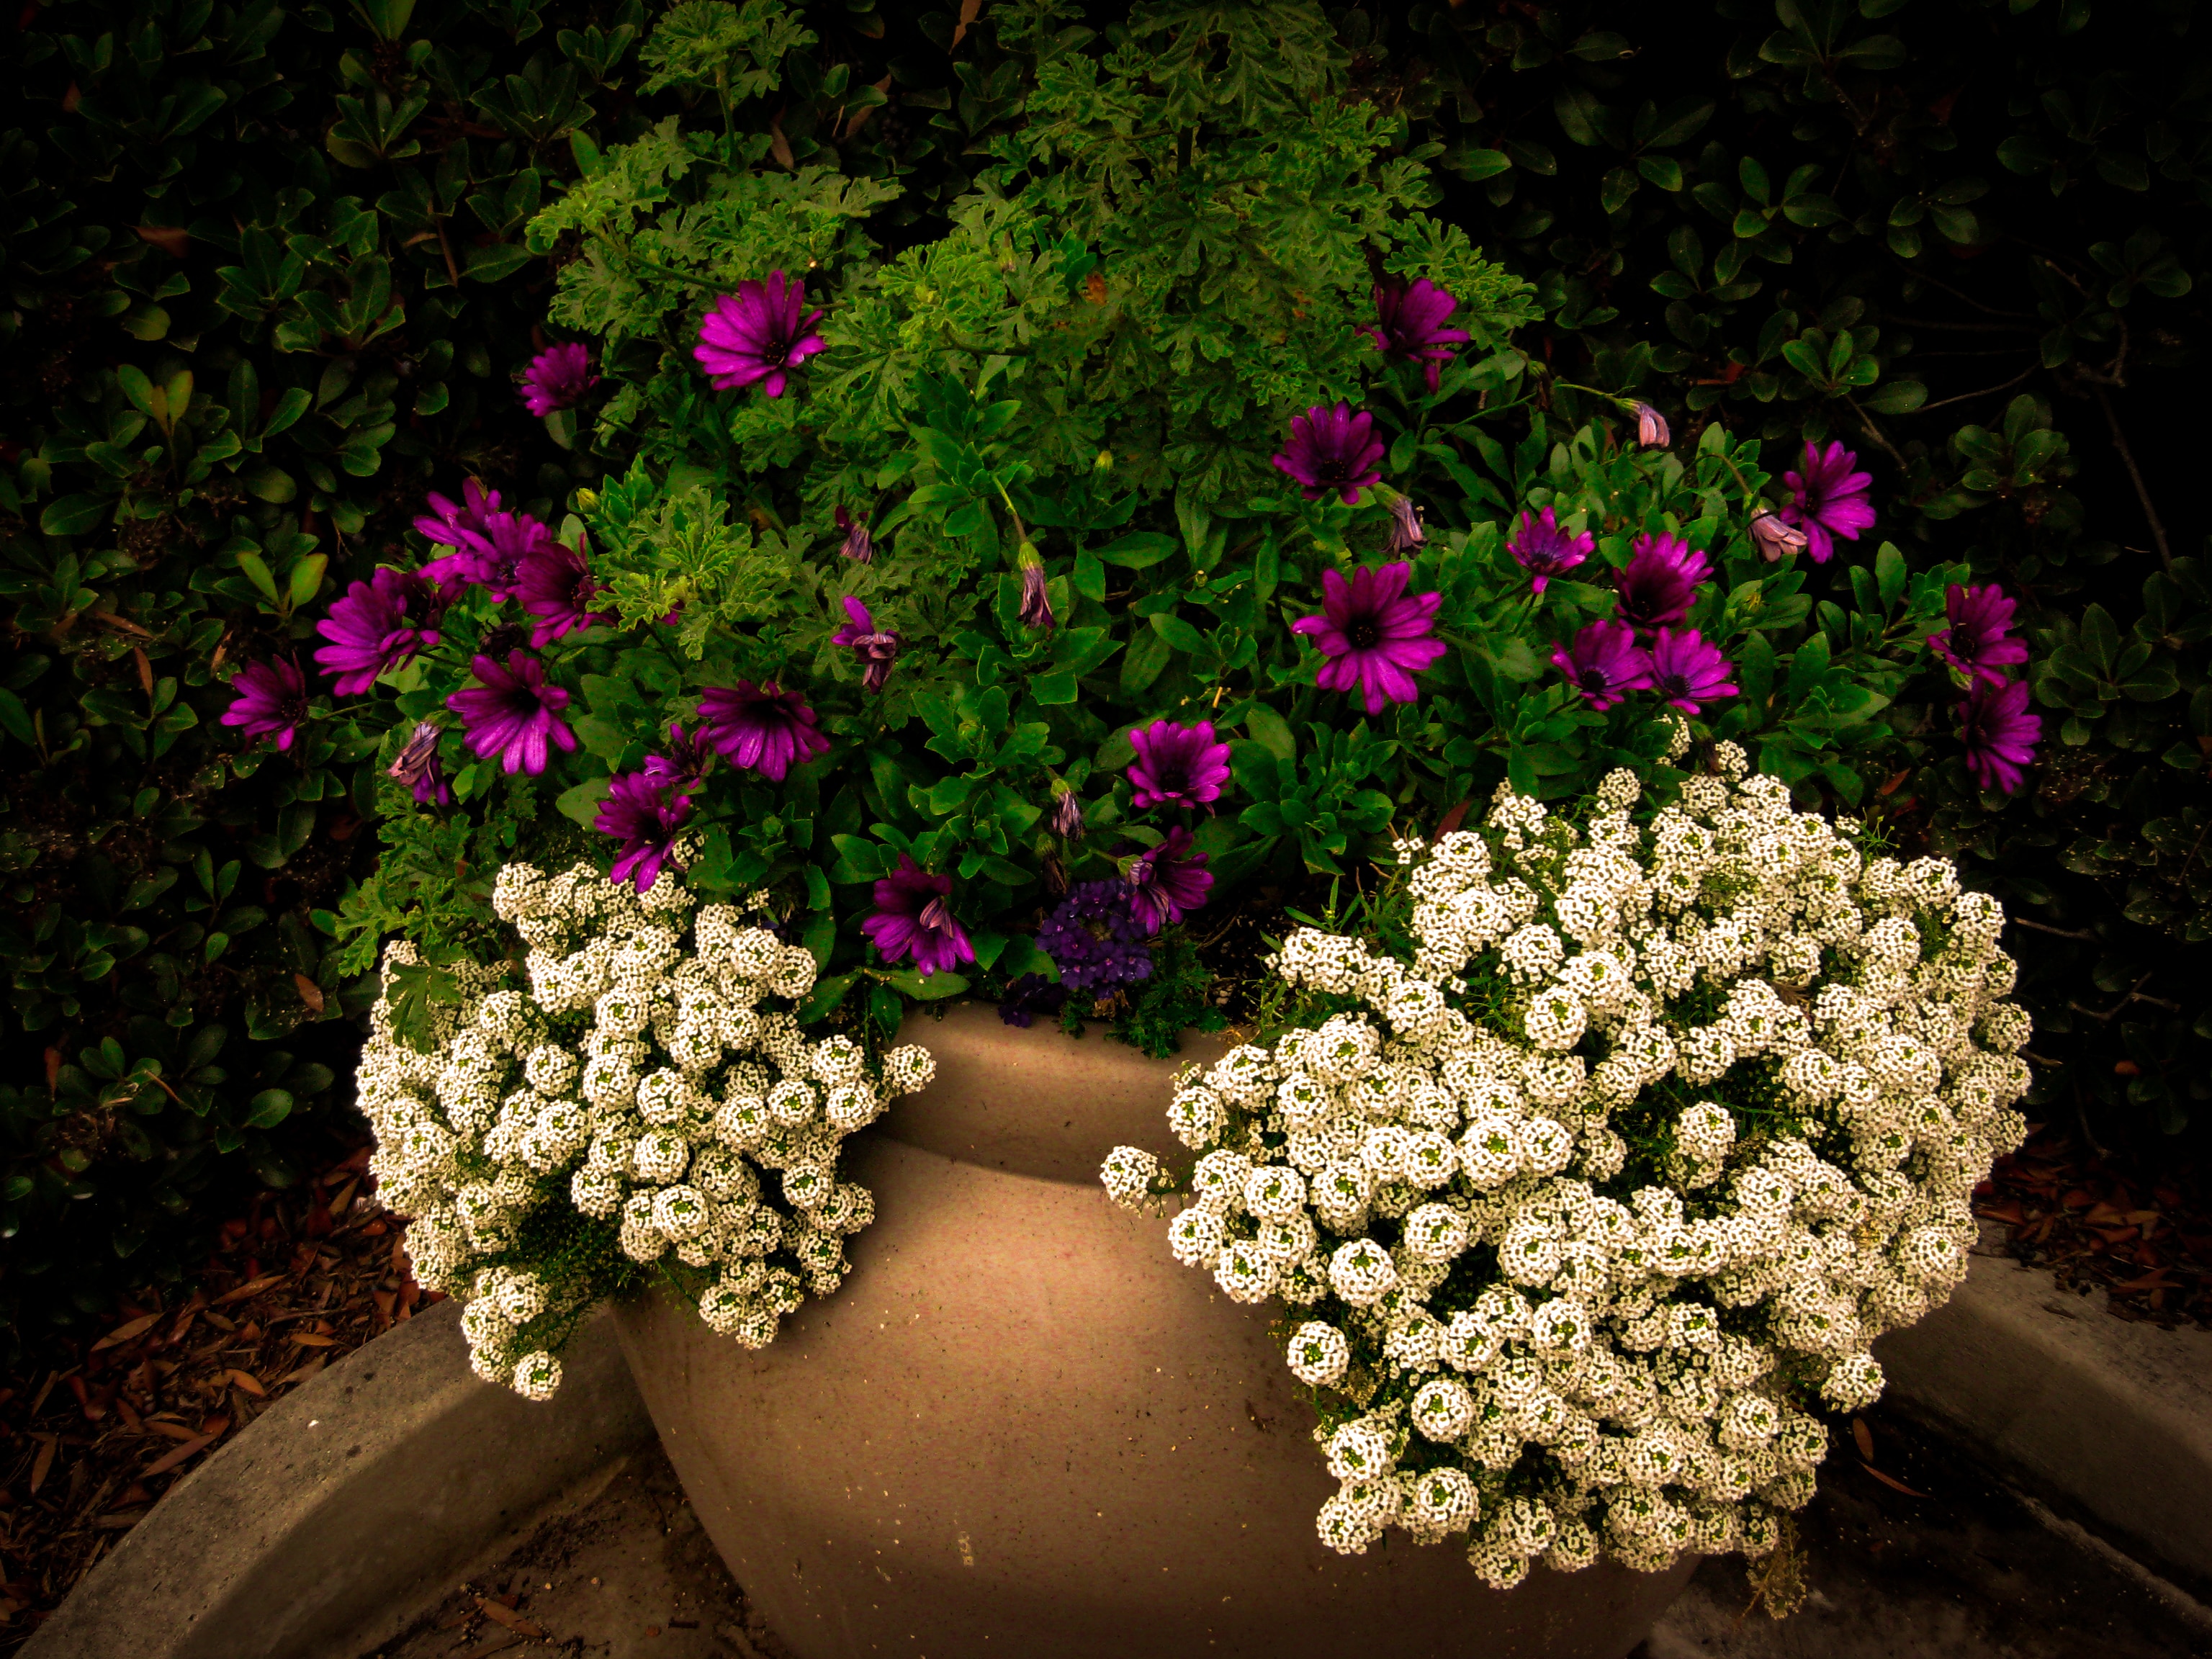 purple green and white petaled flower in brown flower pot